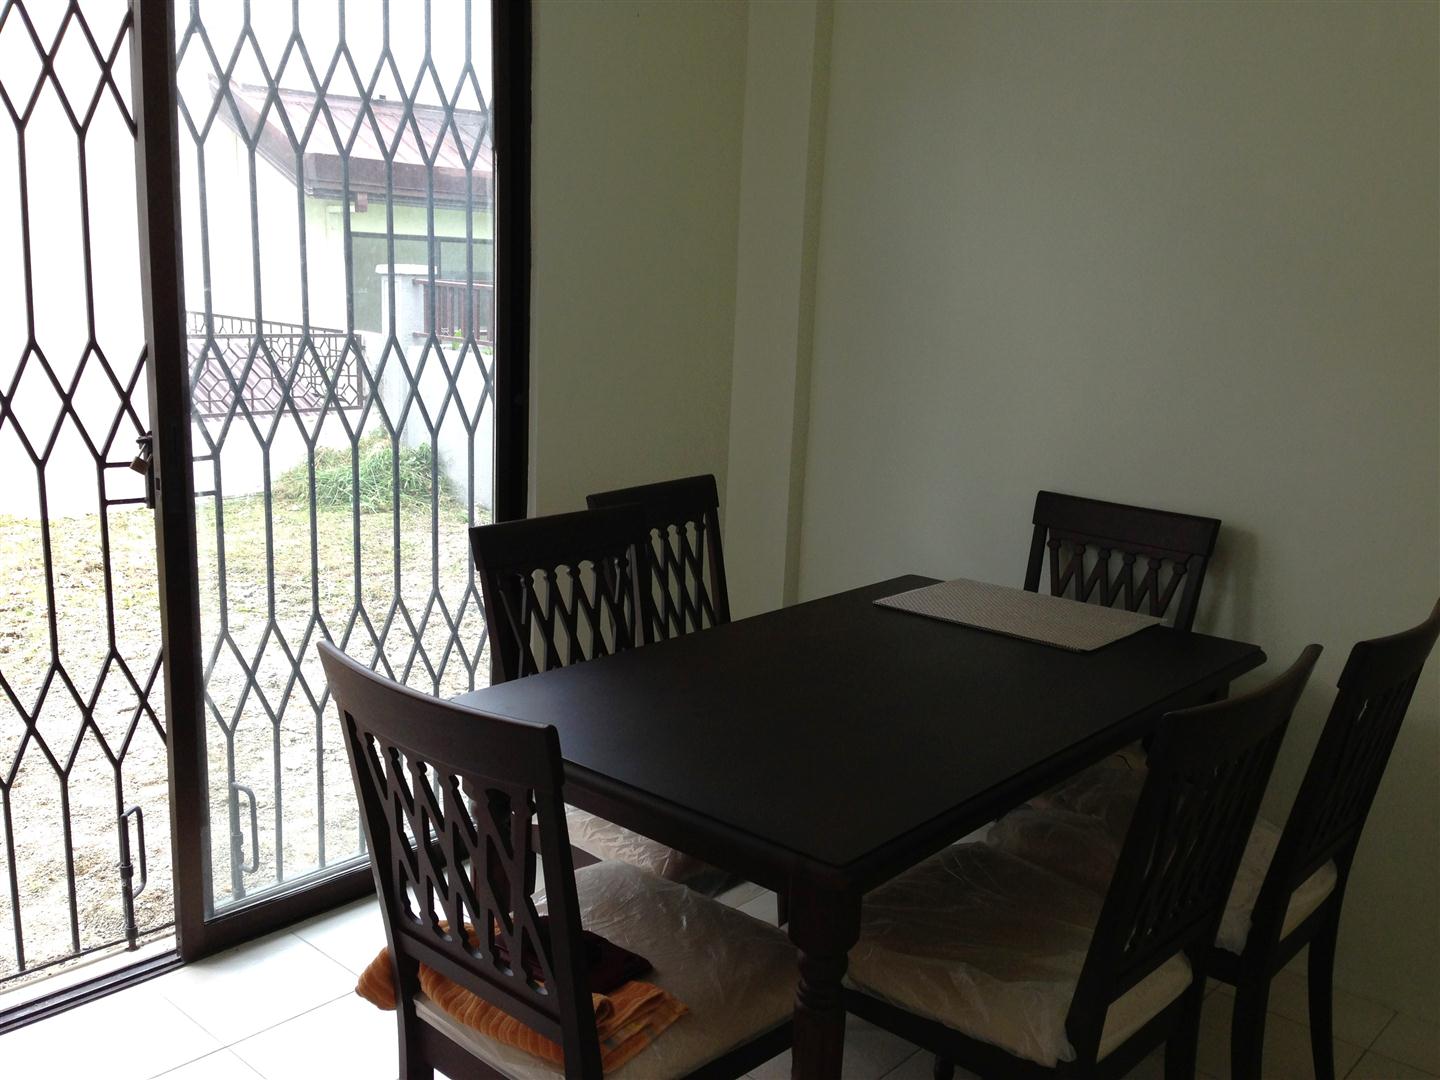 townhouse-with-4-bedrooms-located-in-talisay-city-cebu